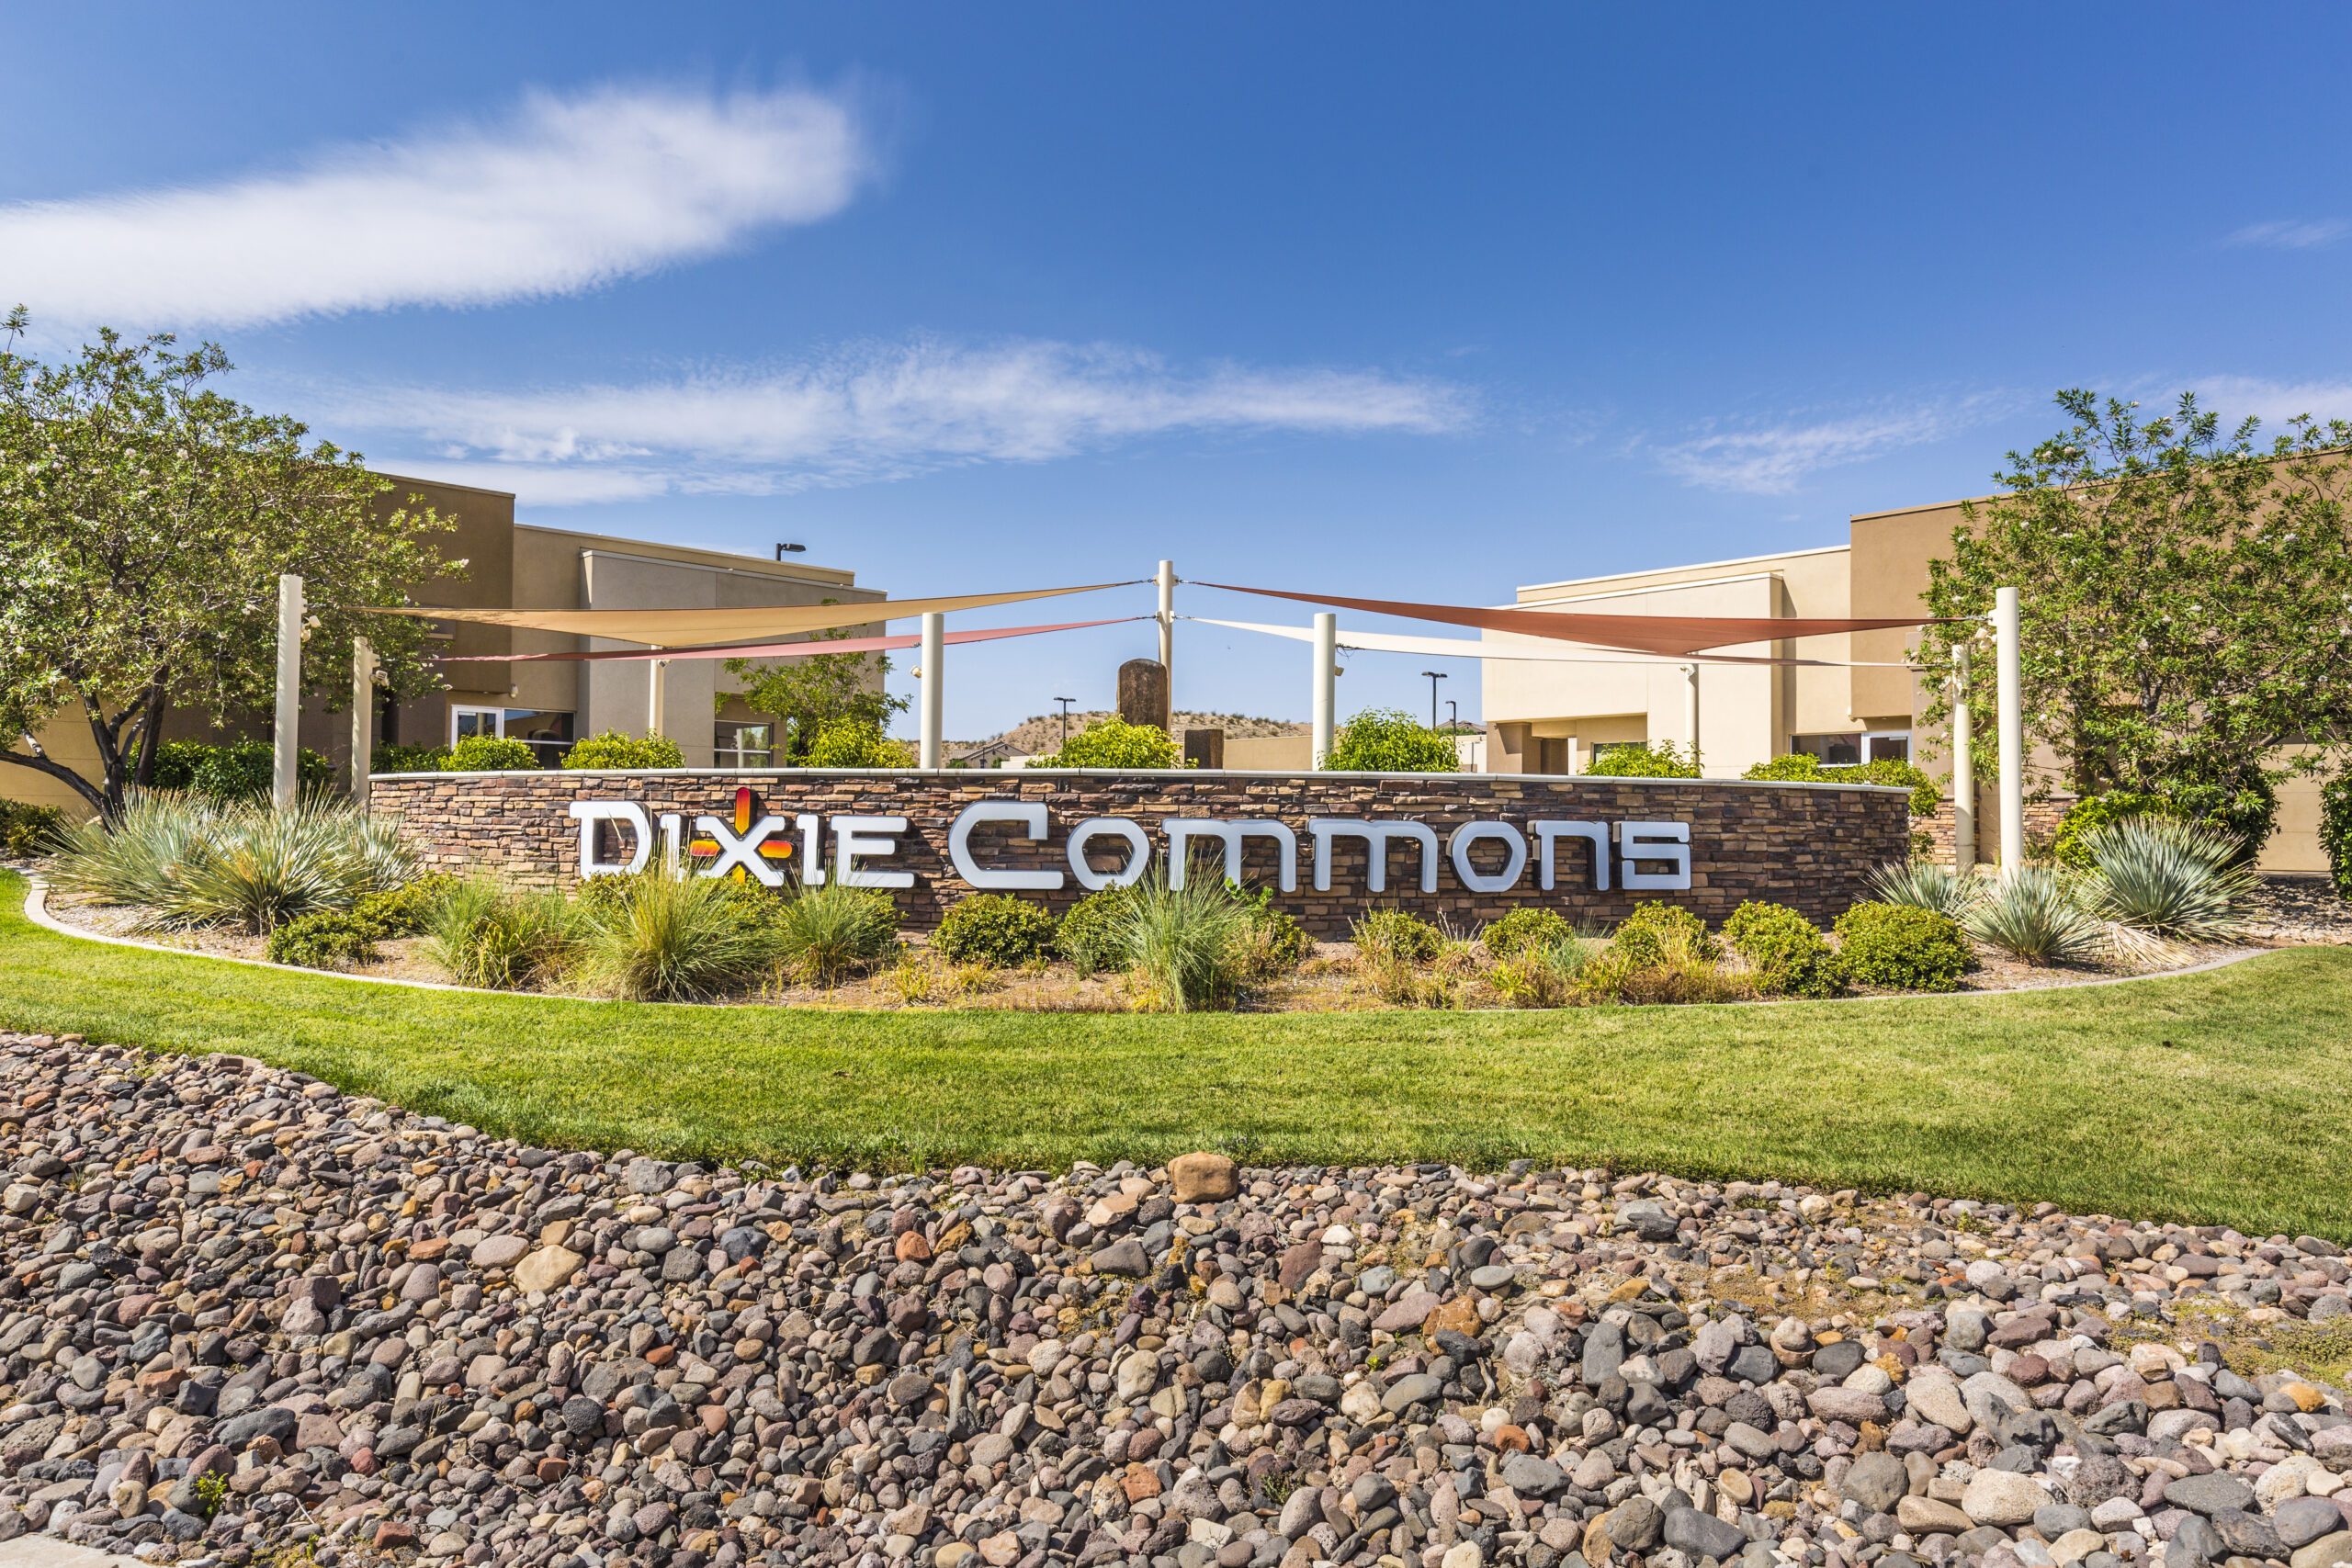 Dixie Commons is home to new HEAT location